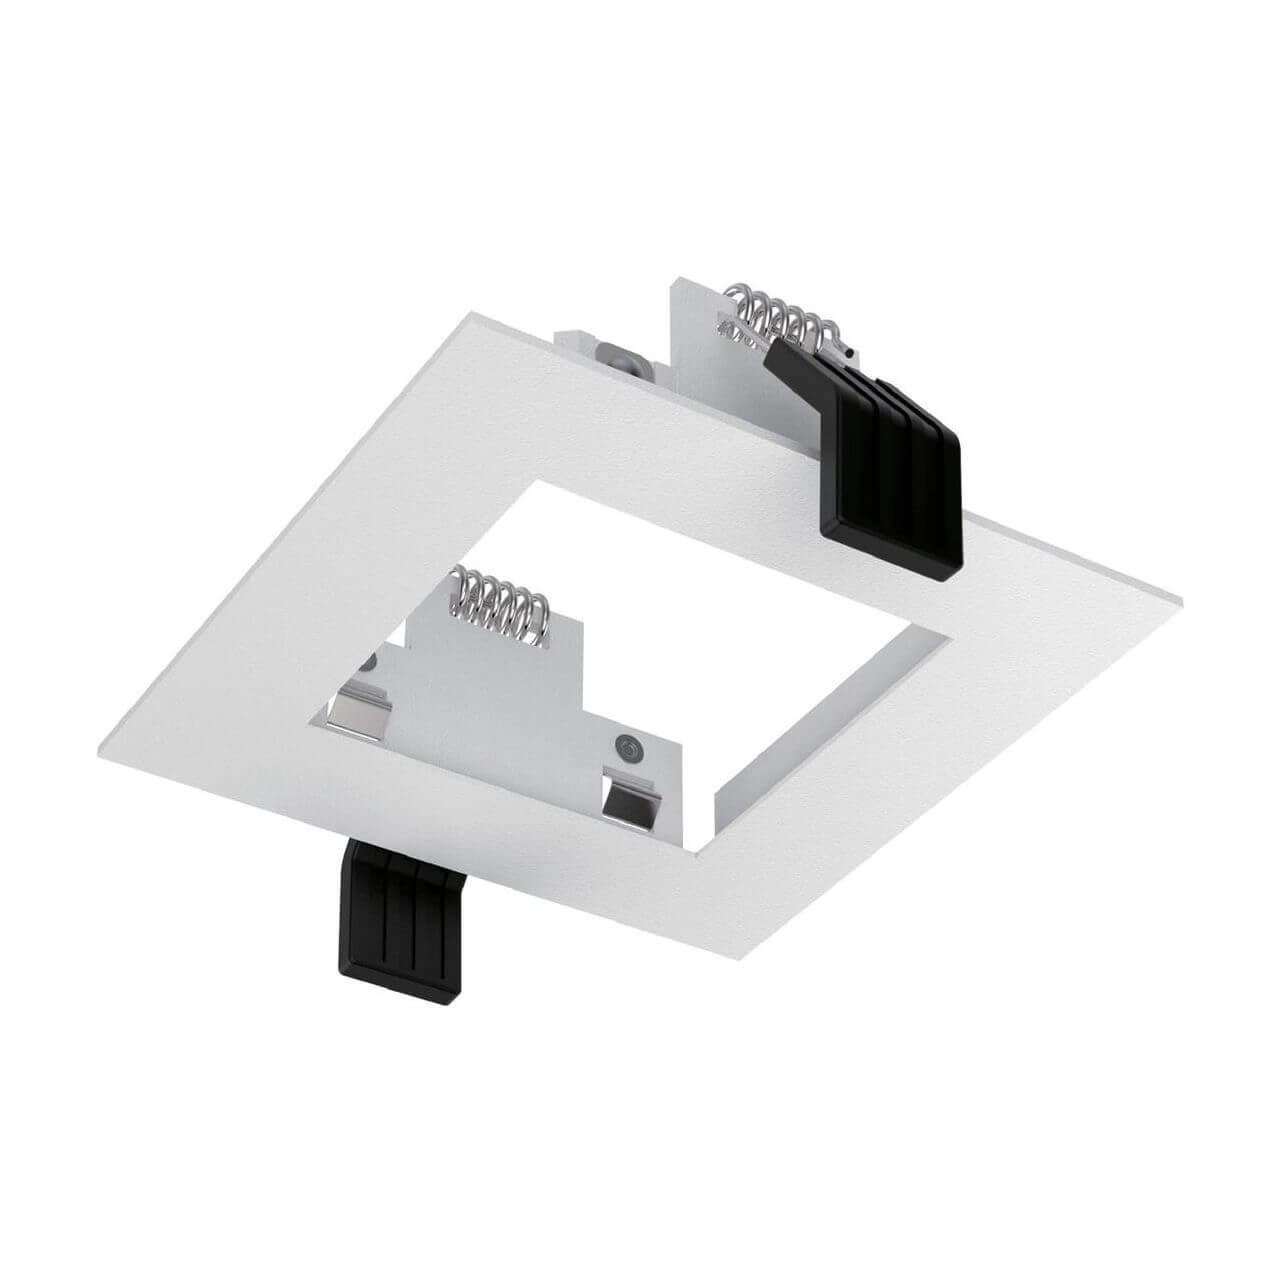    Ideal Lux Dynamic Frame Square Wh 208725